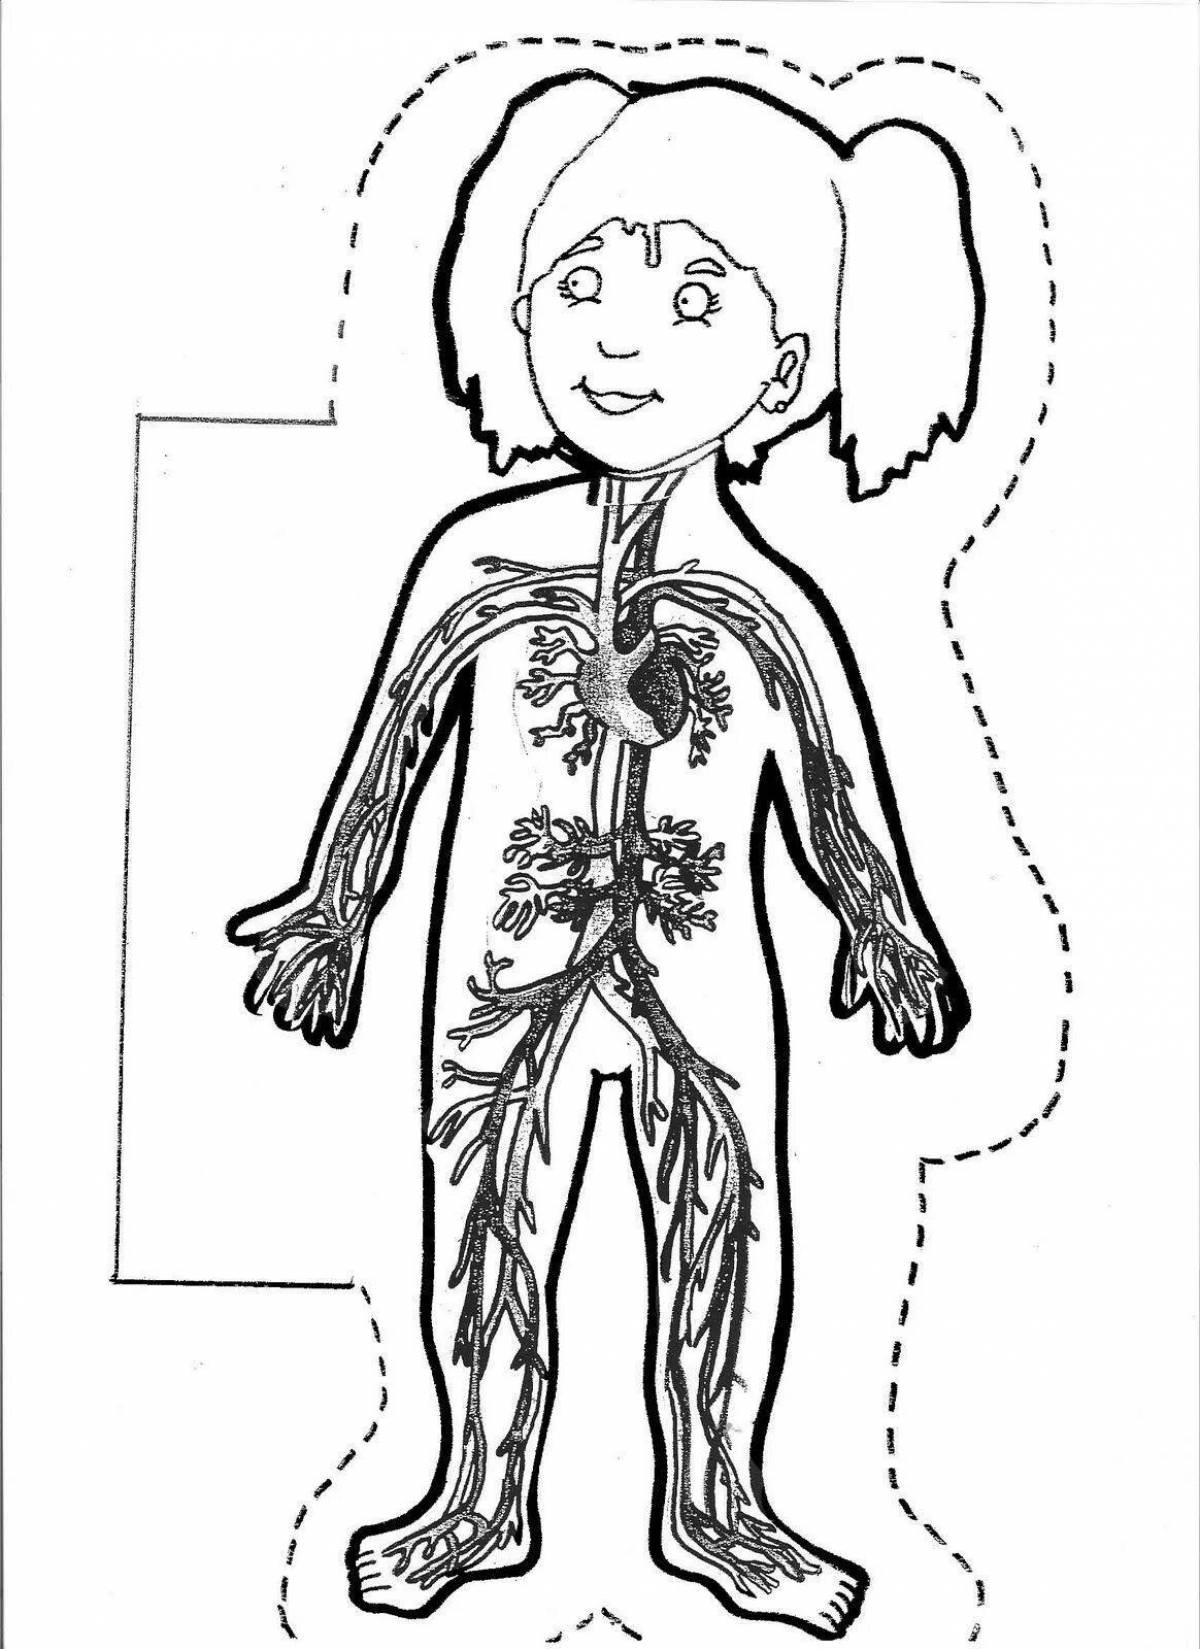 Colorful coloring of the structure of the human body for children